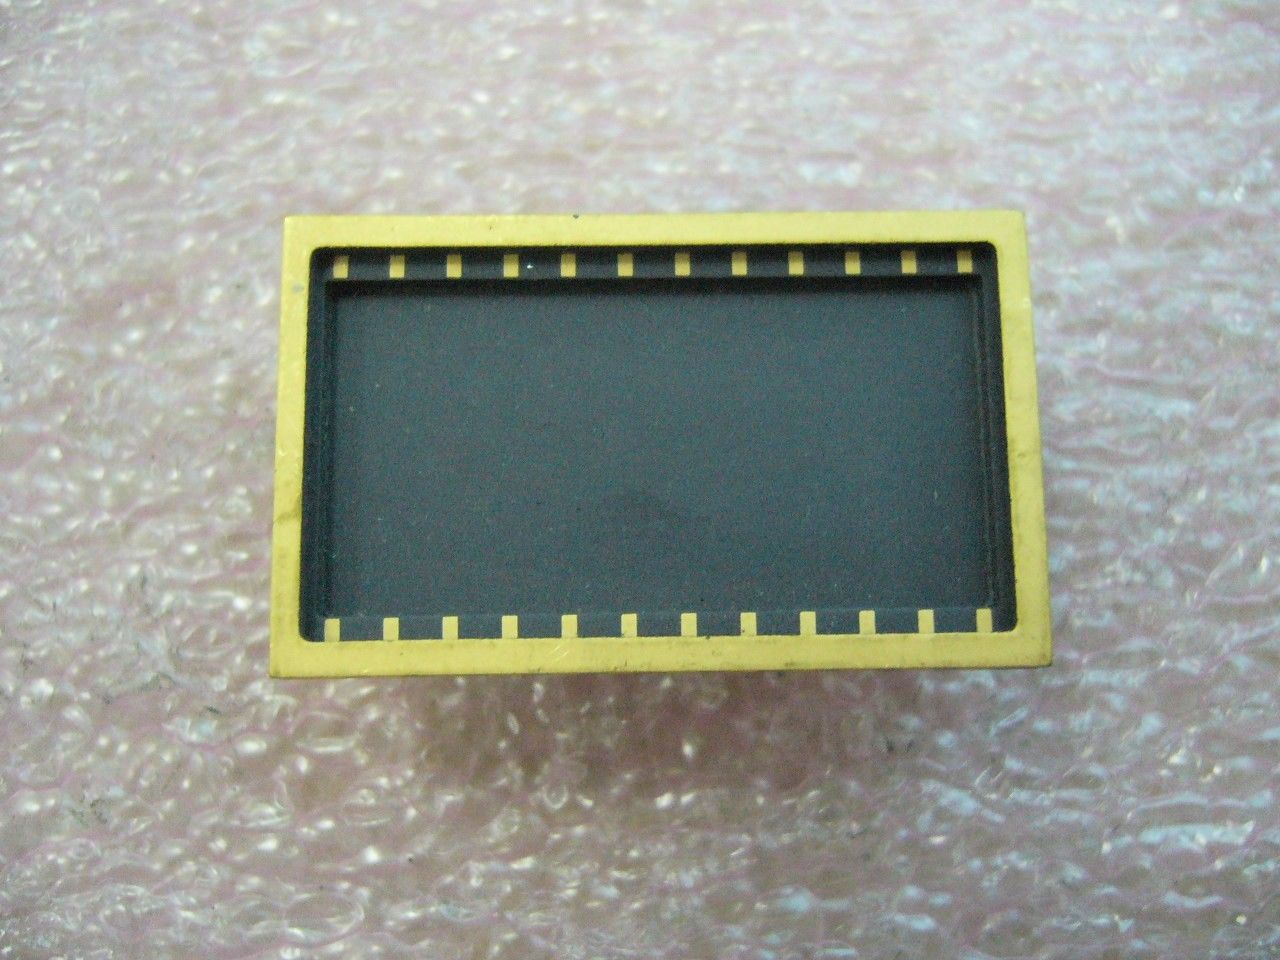 Vintage un-finished chip 24pin-DIP package with gold legs - Click Image to Close